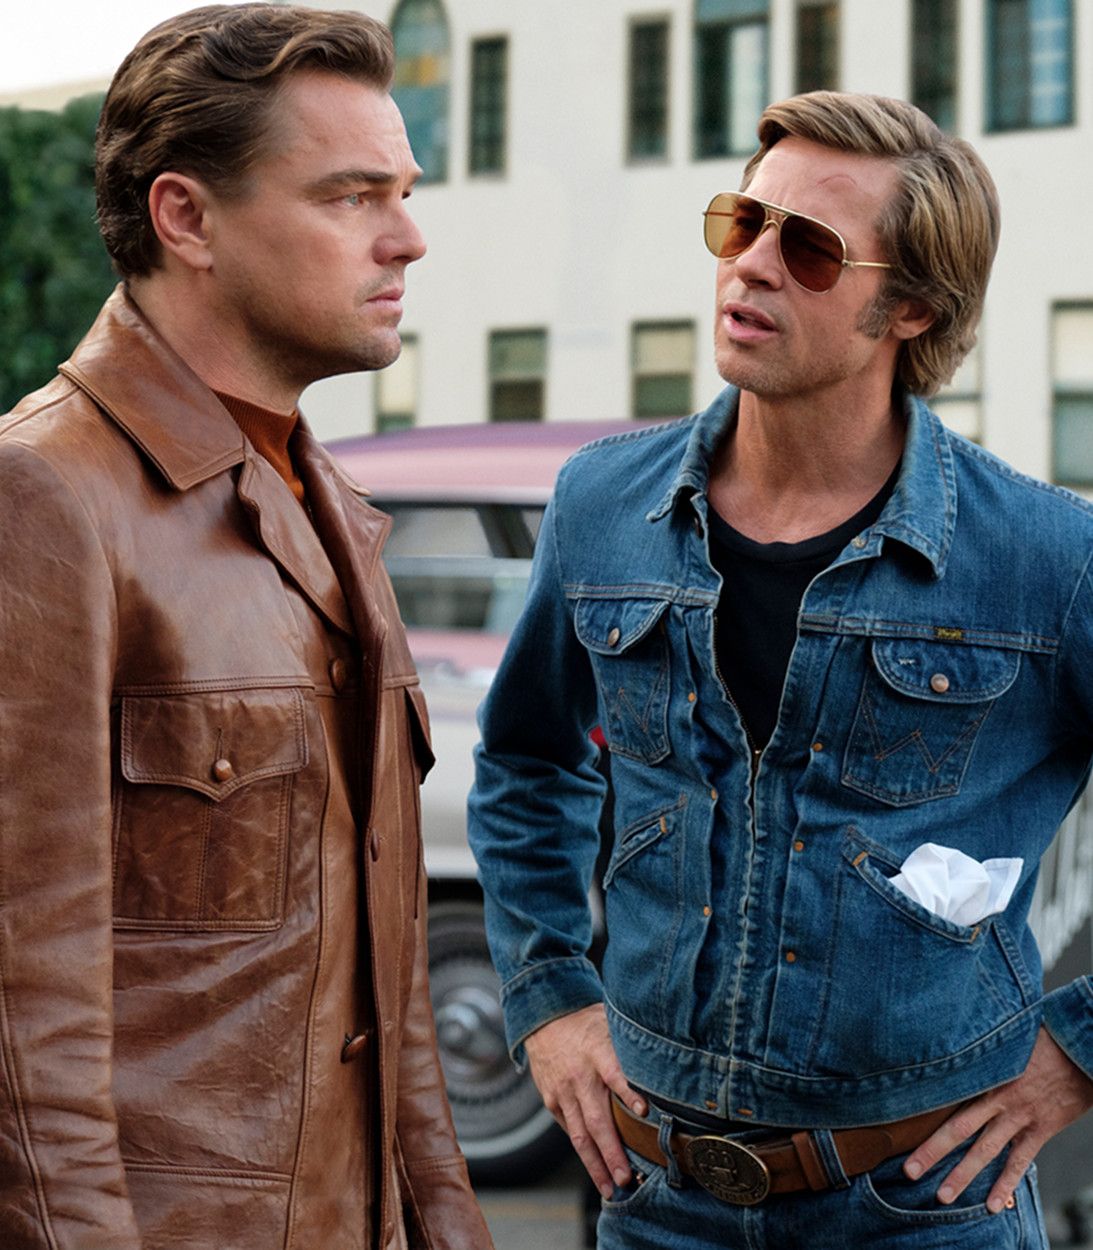 Leonardo DiCaprio and Brad Pitt in Once Upon a TIme in Hollywood